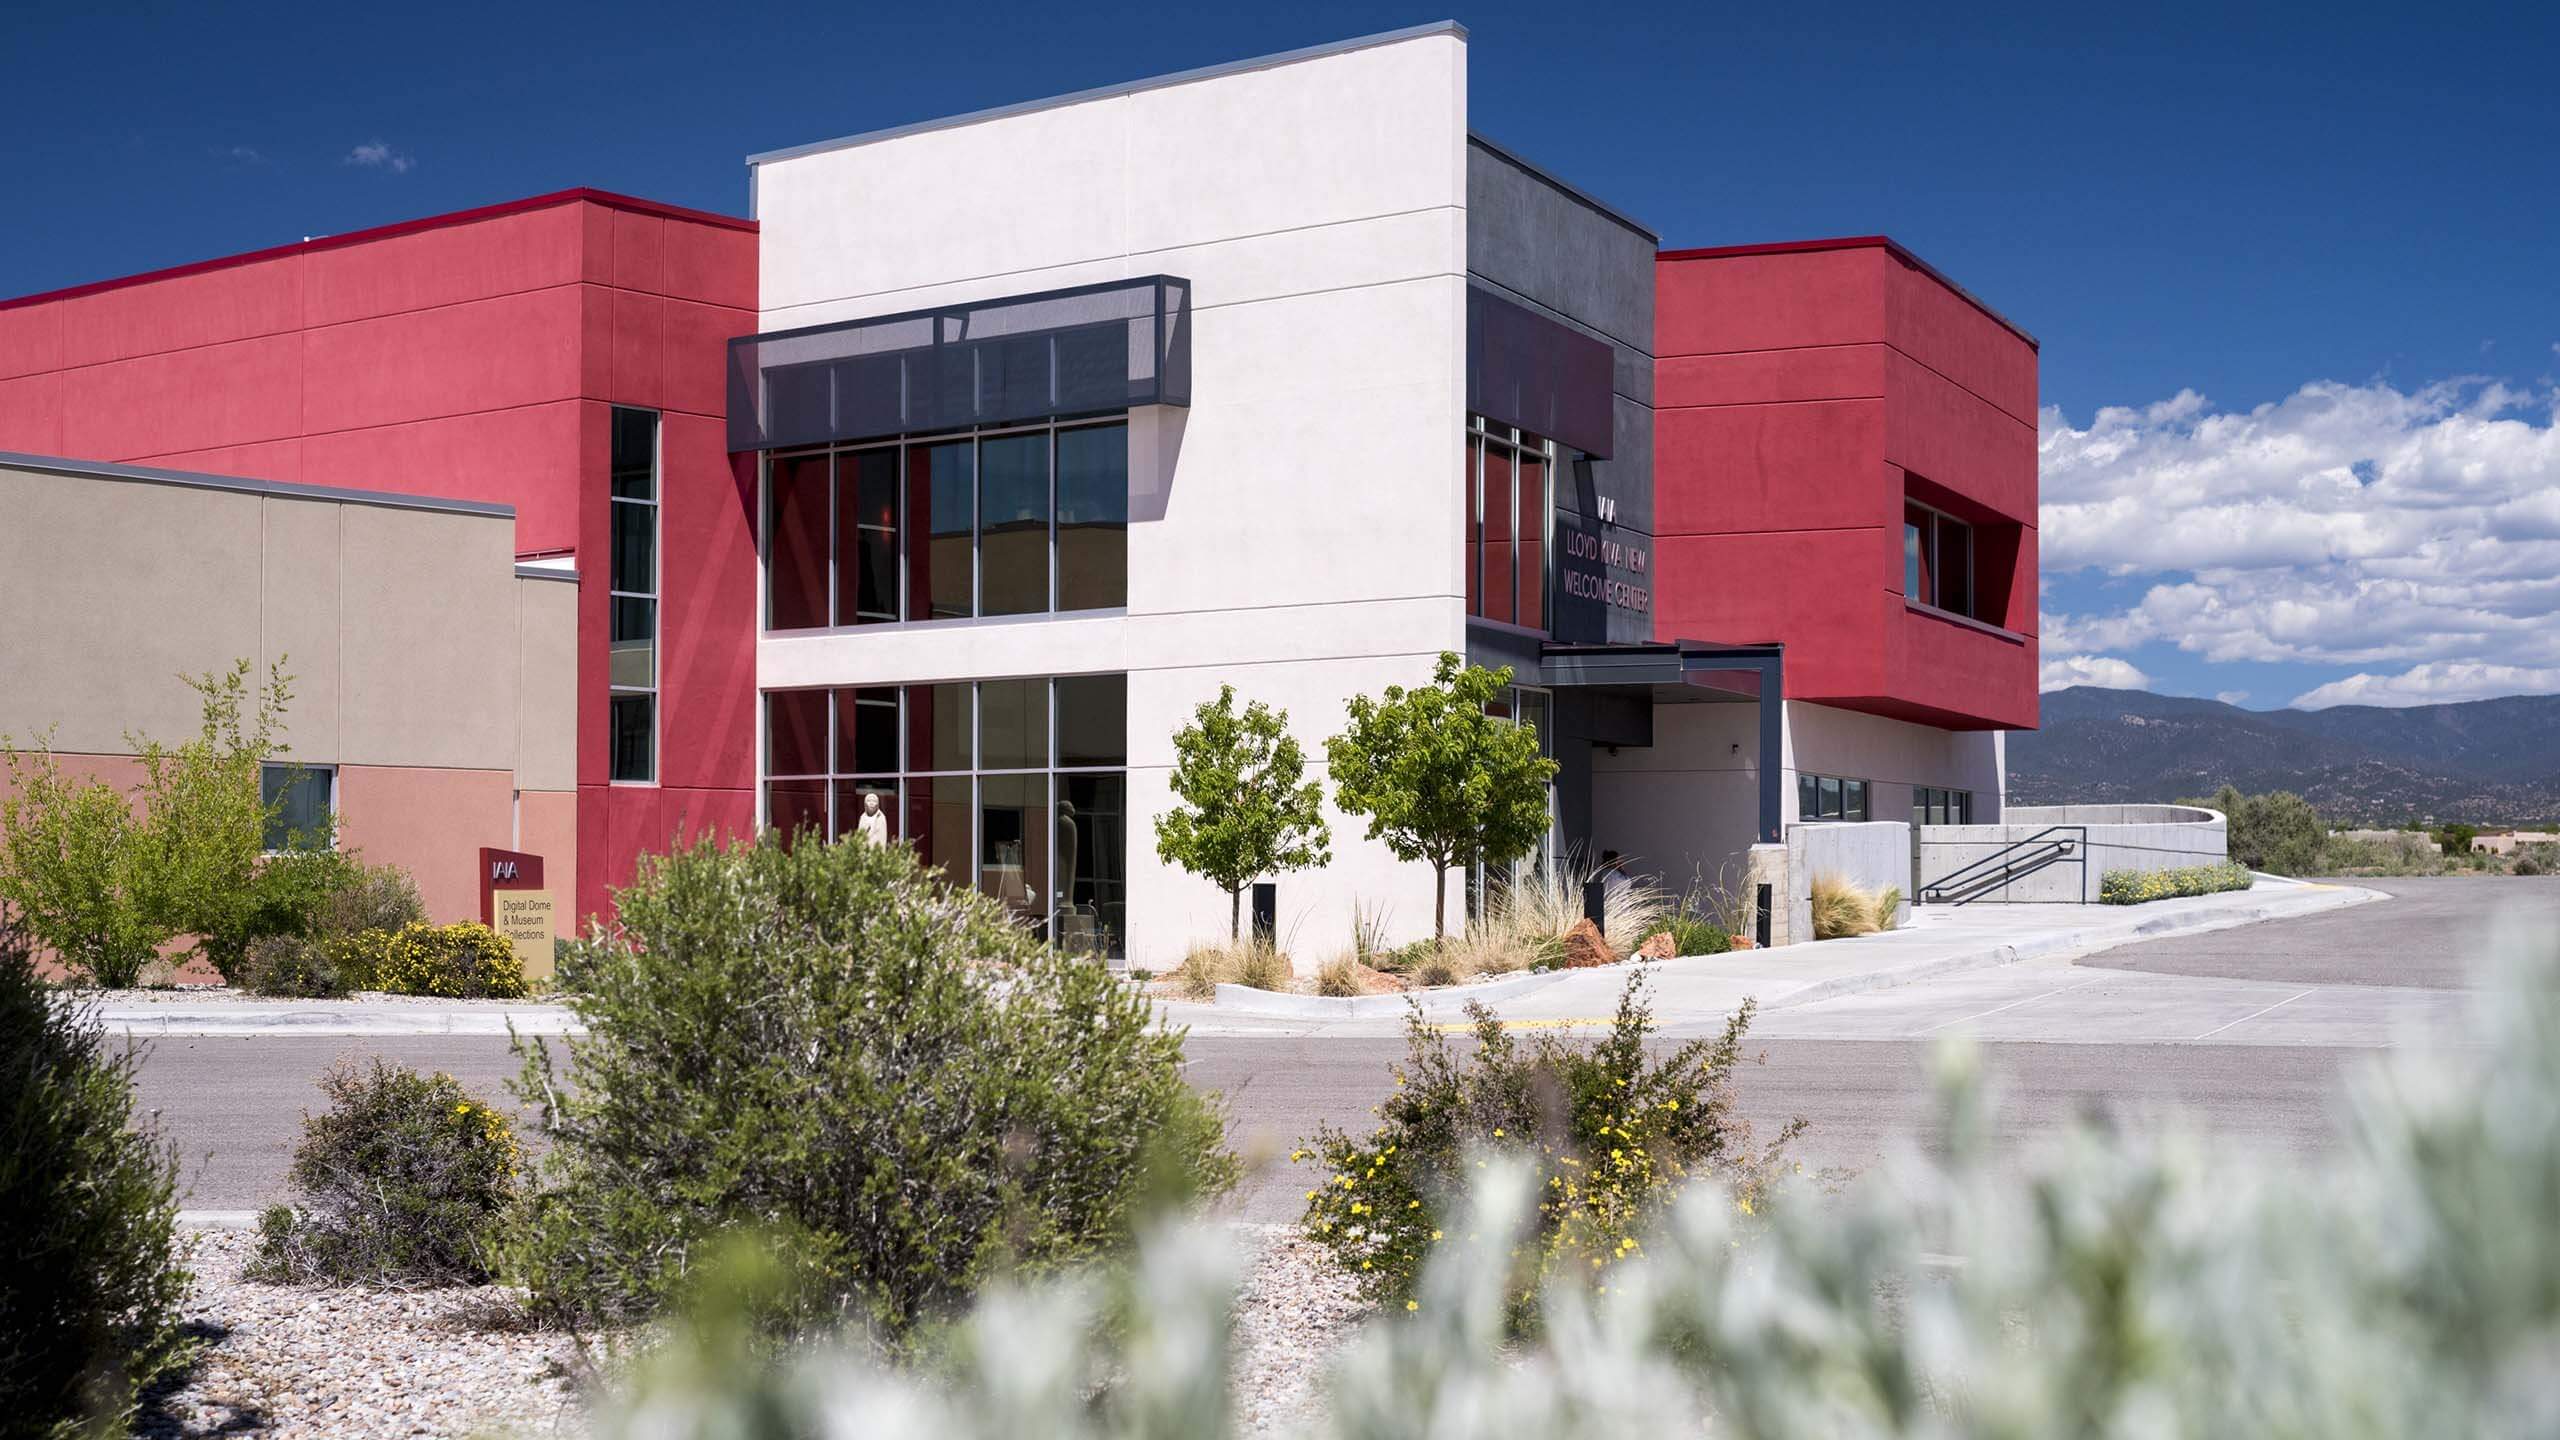 Color photograph of the exterior of the Institute of American Indian Arts (IAIA) in Santa Fe, New Mexico. The contemporary building consists of several angled surfaces with many windows; the colors are predominantly red, white, and black/gray.